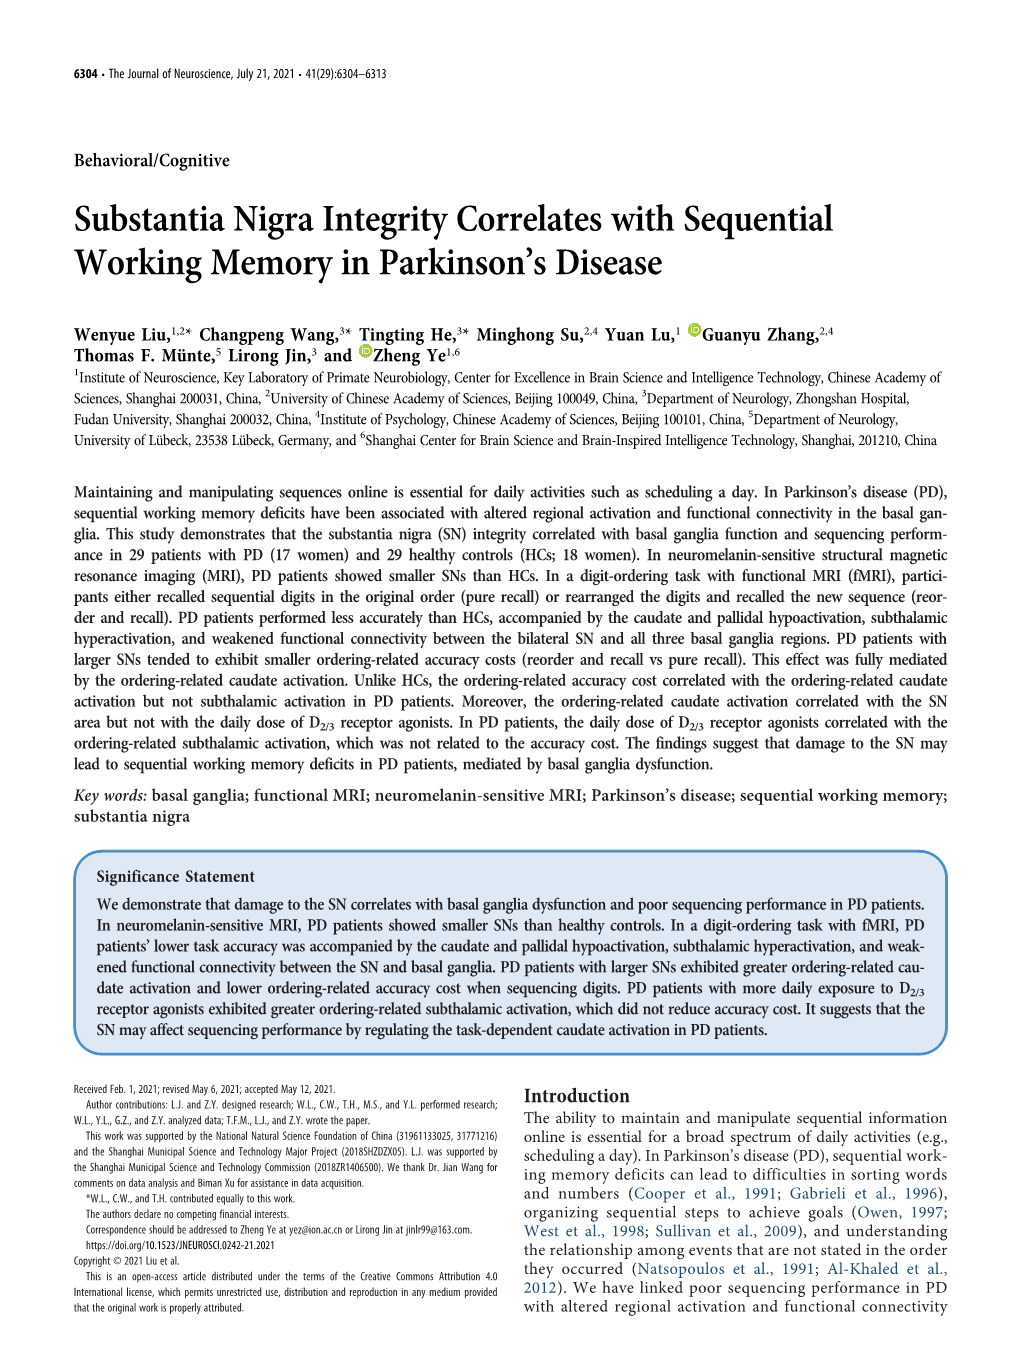 Substantia Nigra Integrity Correlates with Sequential Working Memory in Parkinson’S Disease